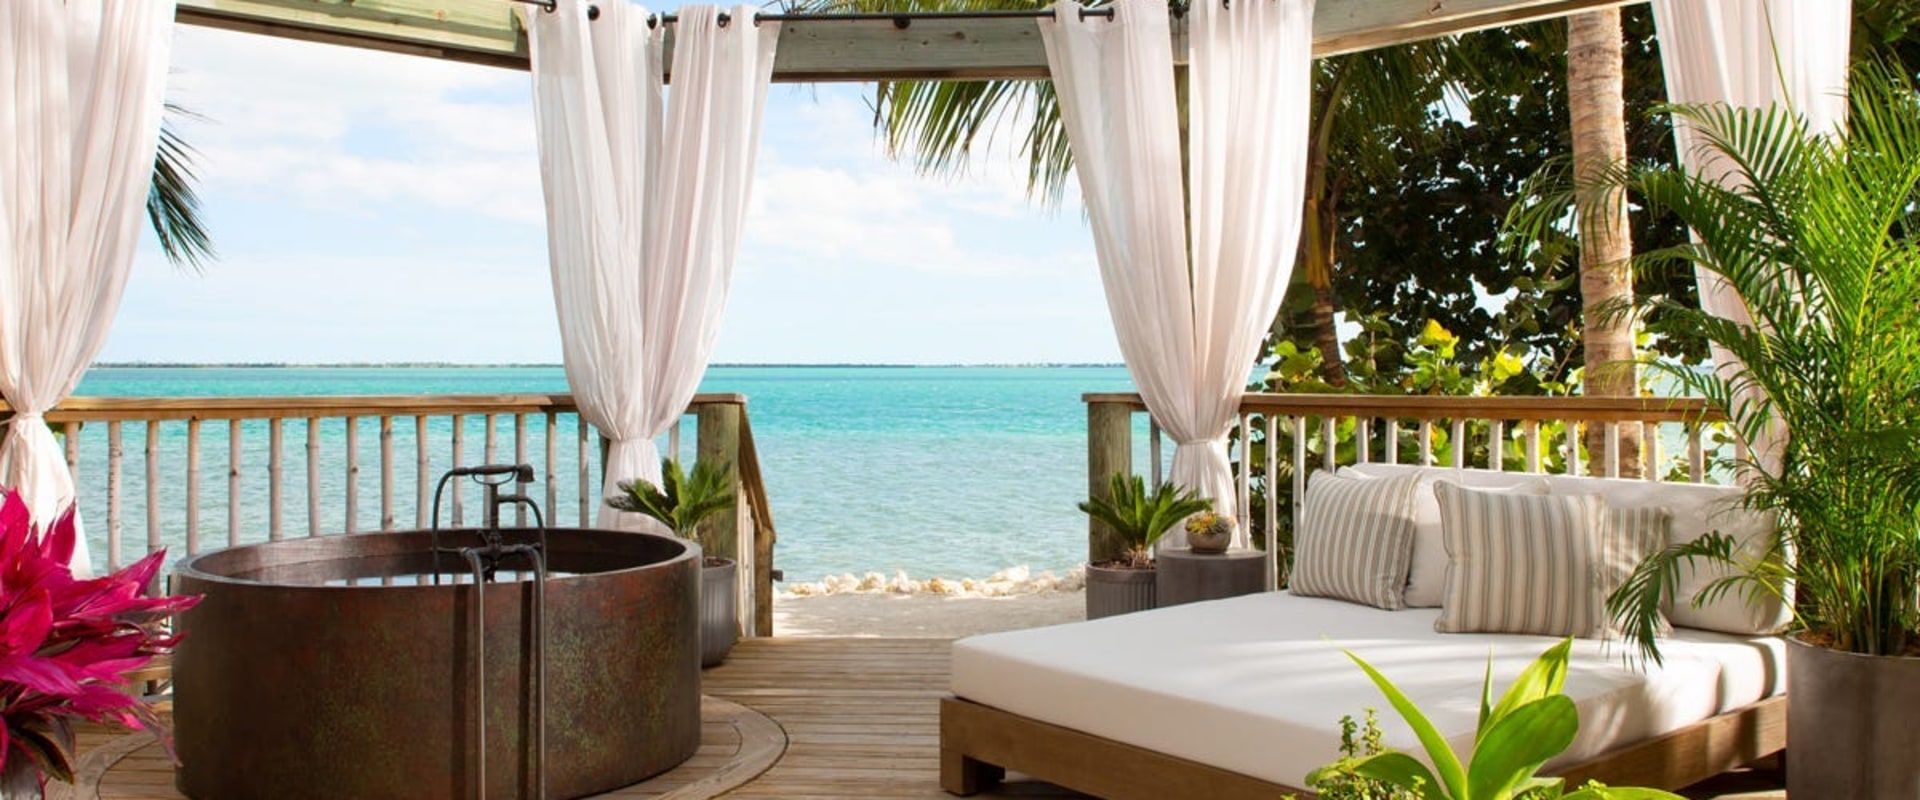 Luxury Hotels and Resorts for Romantic Beach Vacations in the US and Abroad